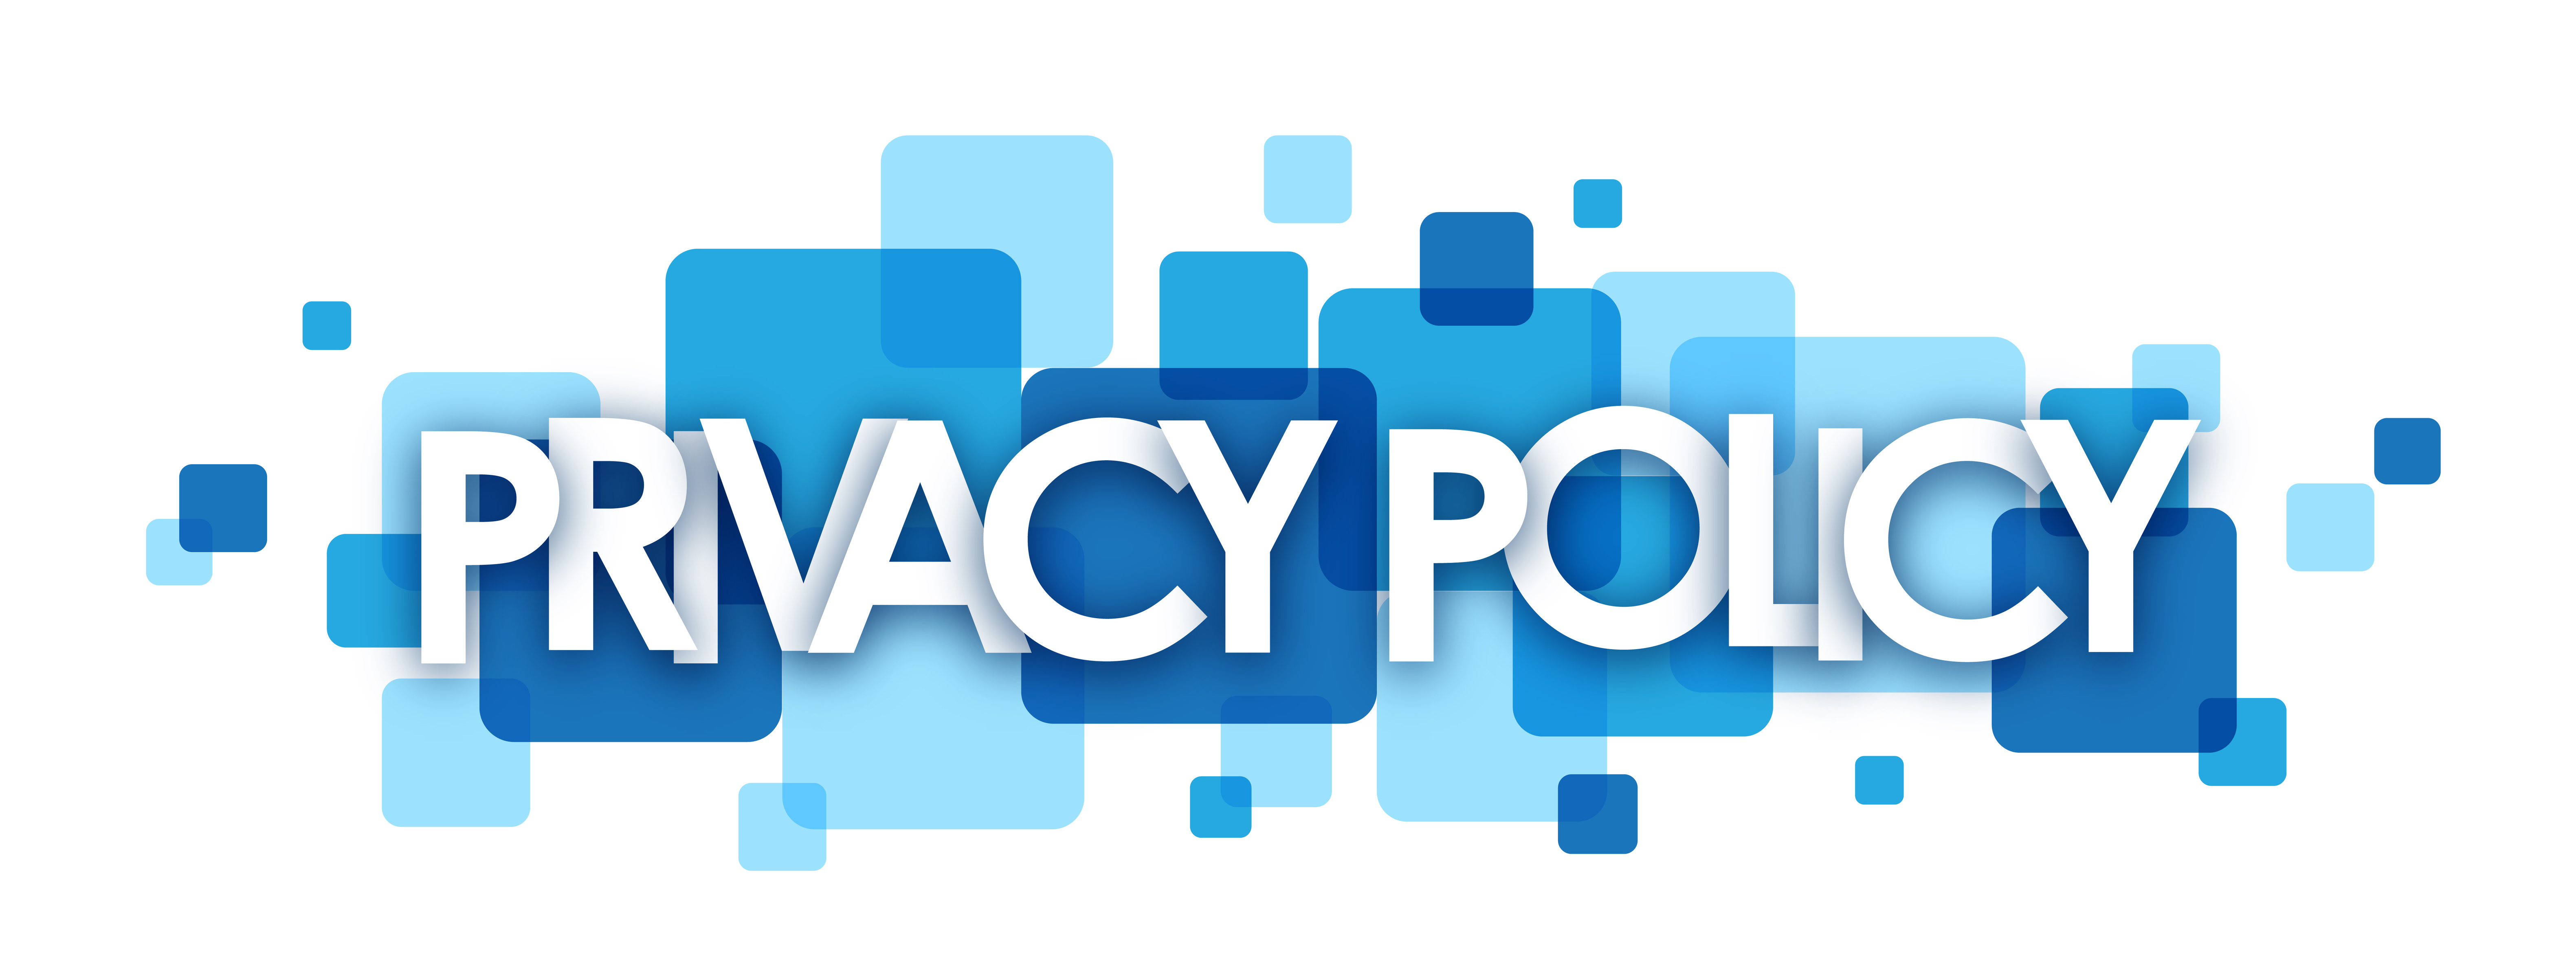 Privacy policy with blue squares in background and text in white 3D letters spelling PRIVACY POLICY 